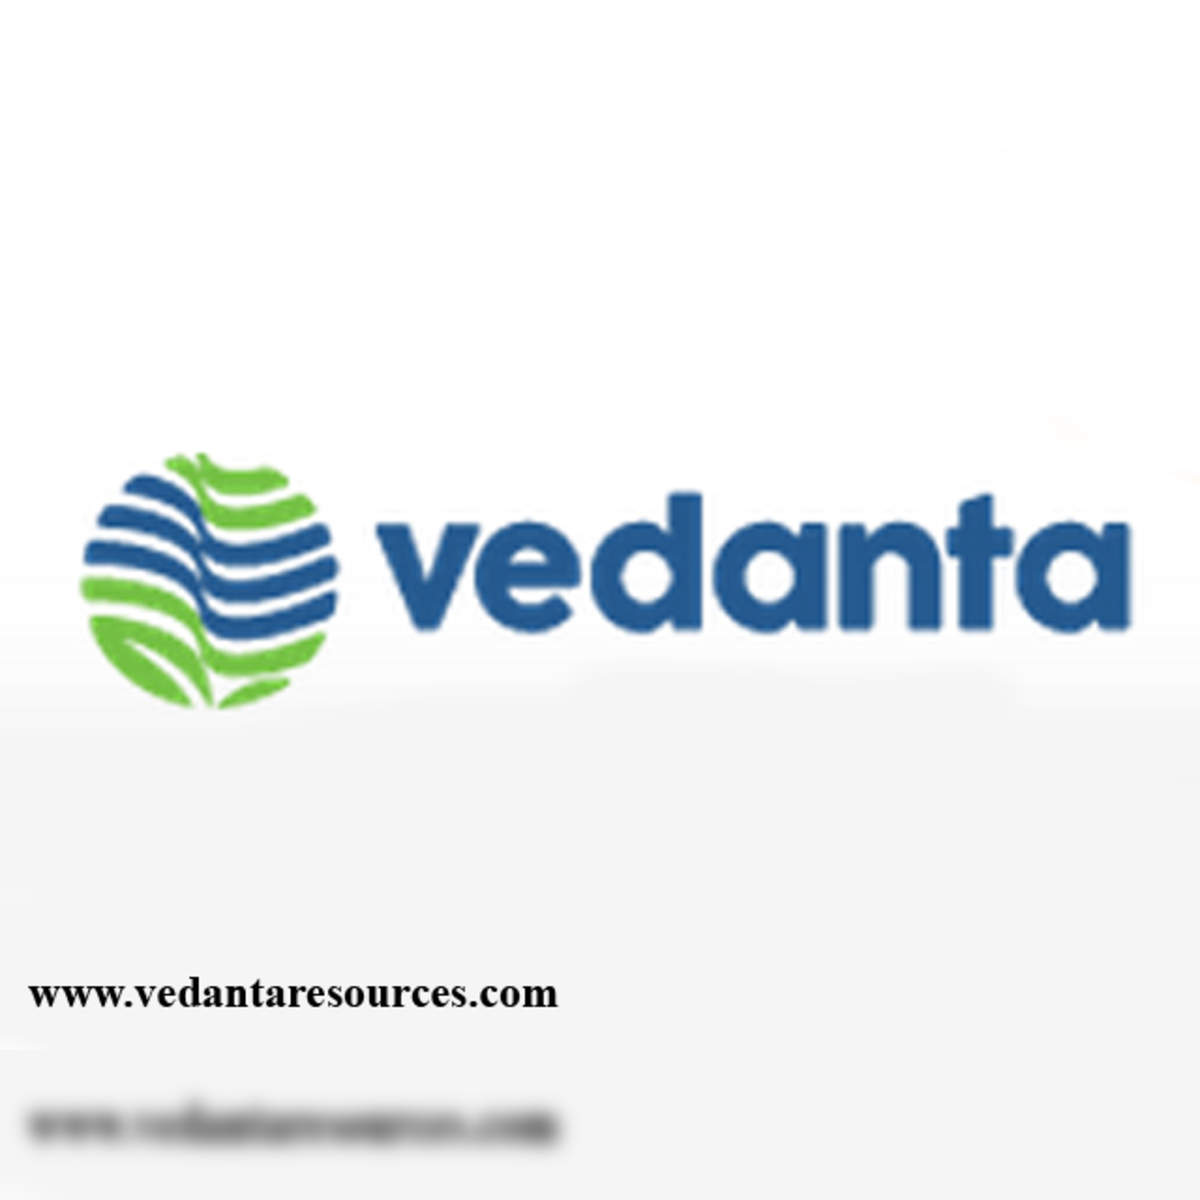 Vedanta Limited - Leading Natural Resources Company